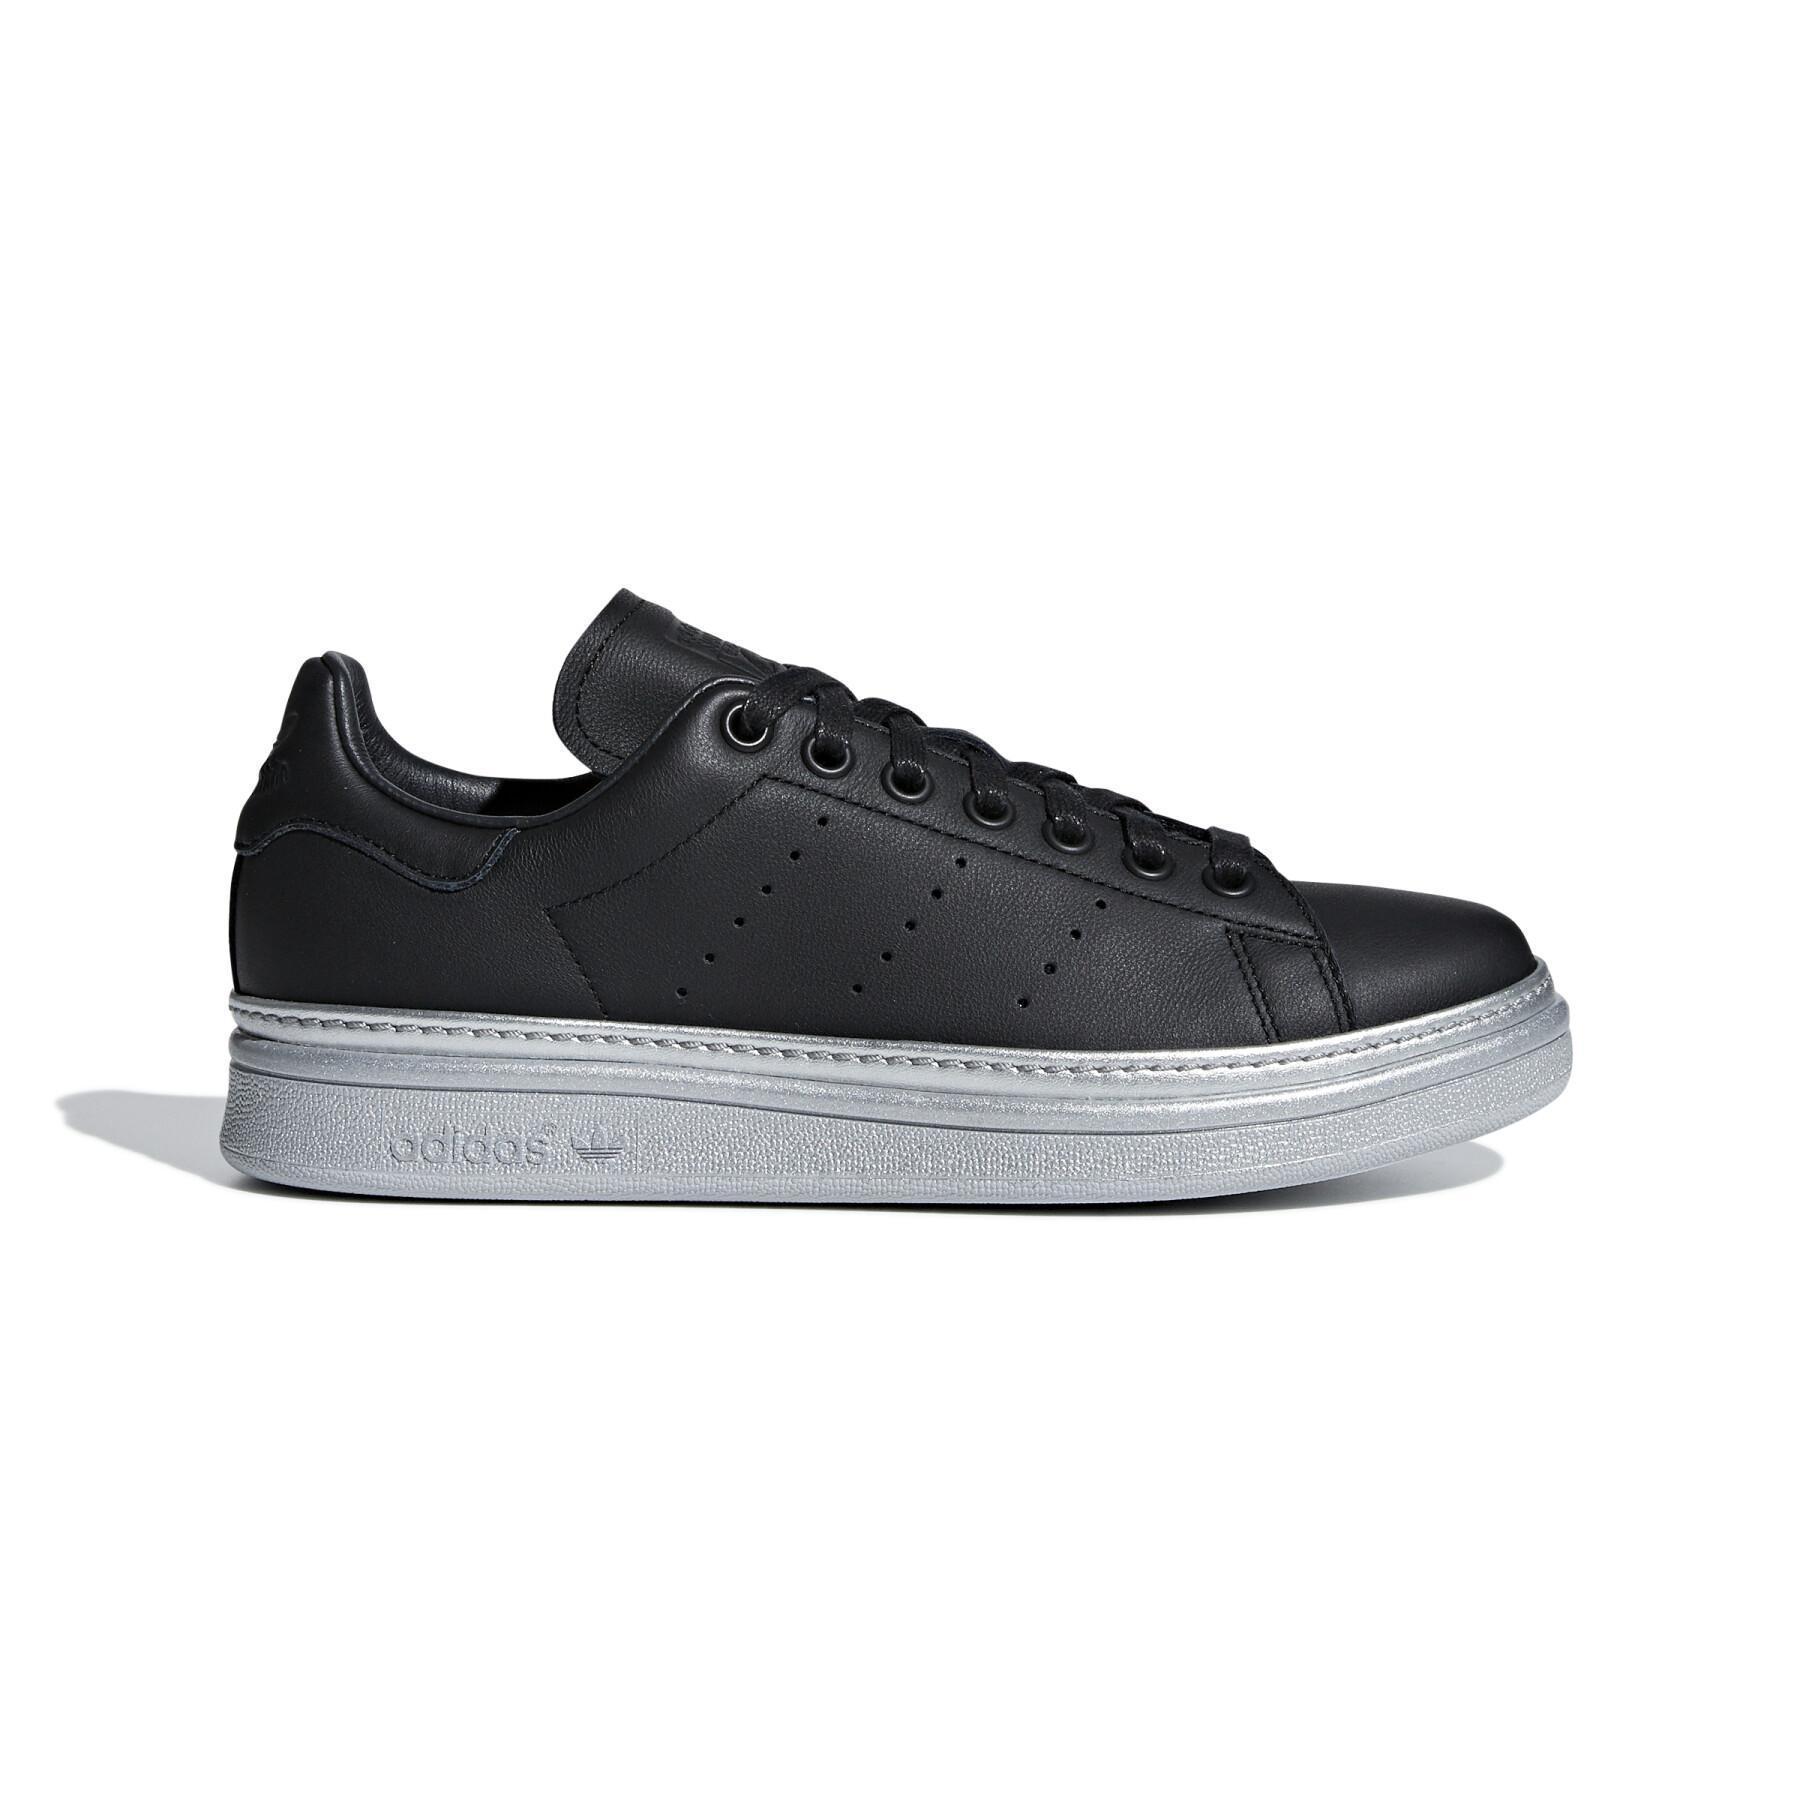 Women's sneakers adidas Stan Smith New Bold